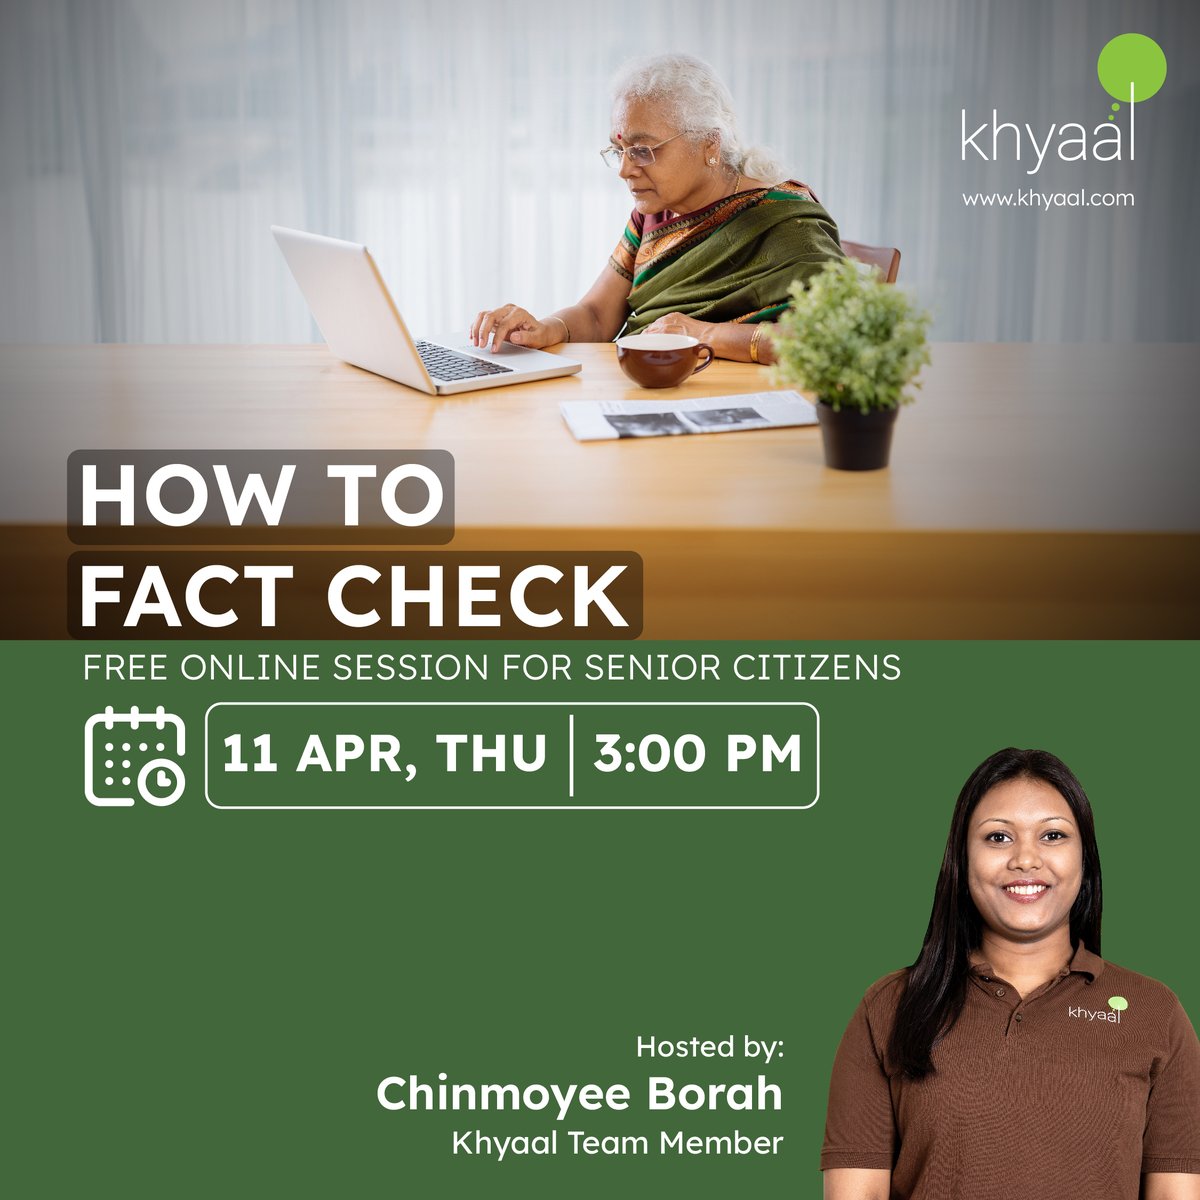 Learn how to verify information before believing or sharing it. Attend this free online session if you're 55 years or older, or share it with your elderly loved one. #factcheck #seniorcitizens
To attend our exclusive sessions:
📱 Download the app : bit.ly/3Kh2aFw
📞 Call…